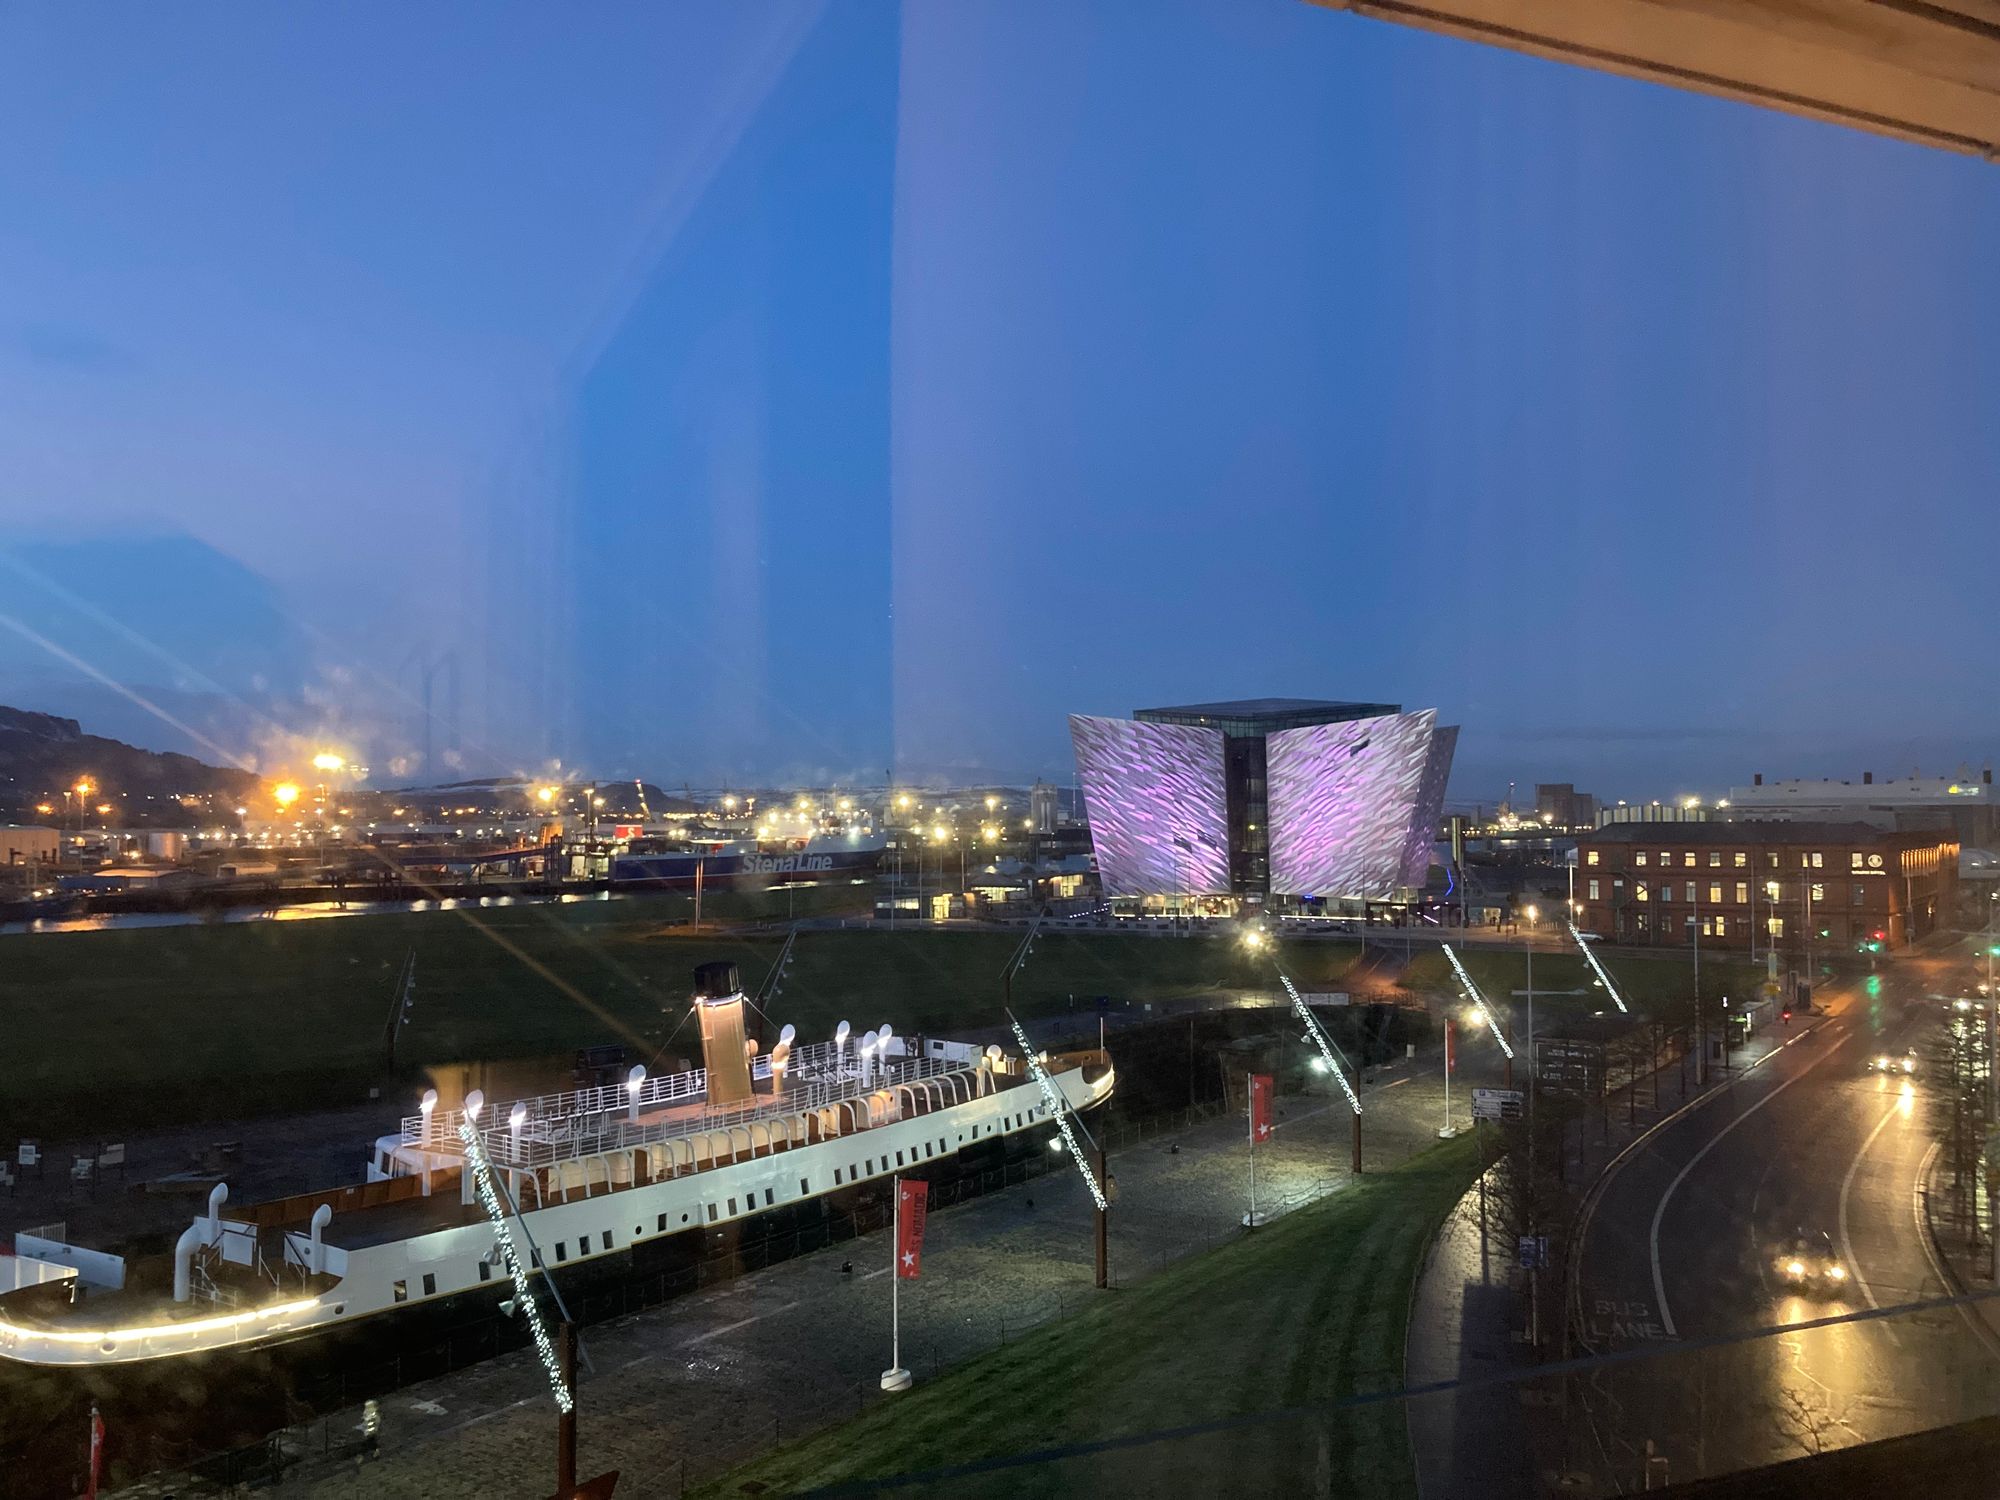 View from my new apartment including a ship and the Titanic museum in Twilight.